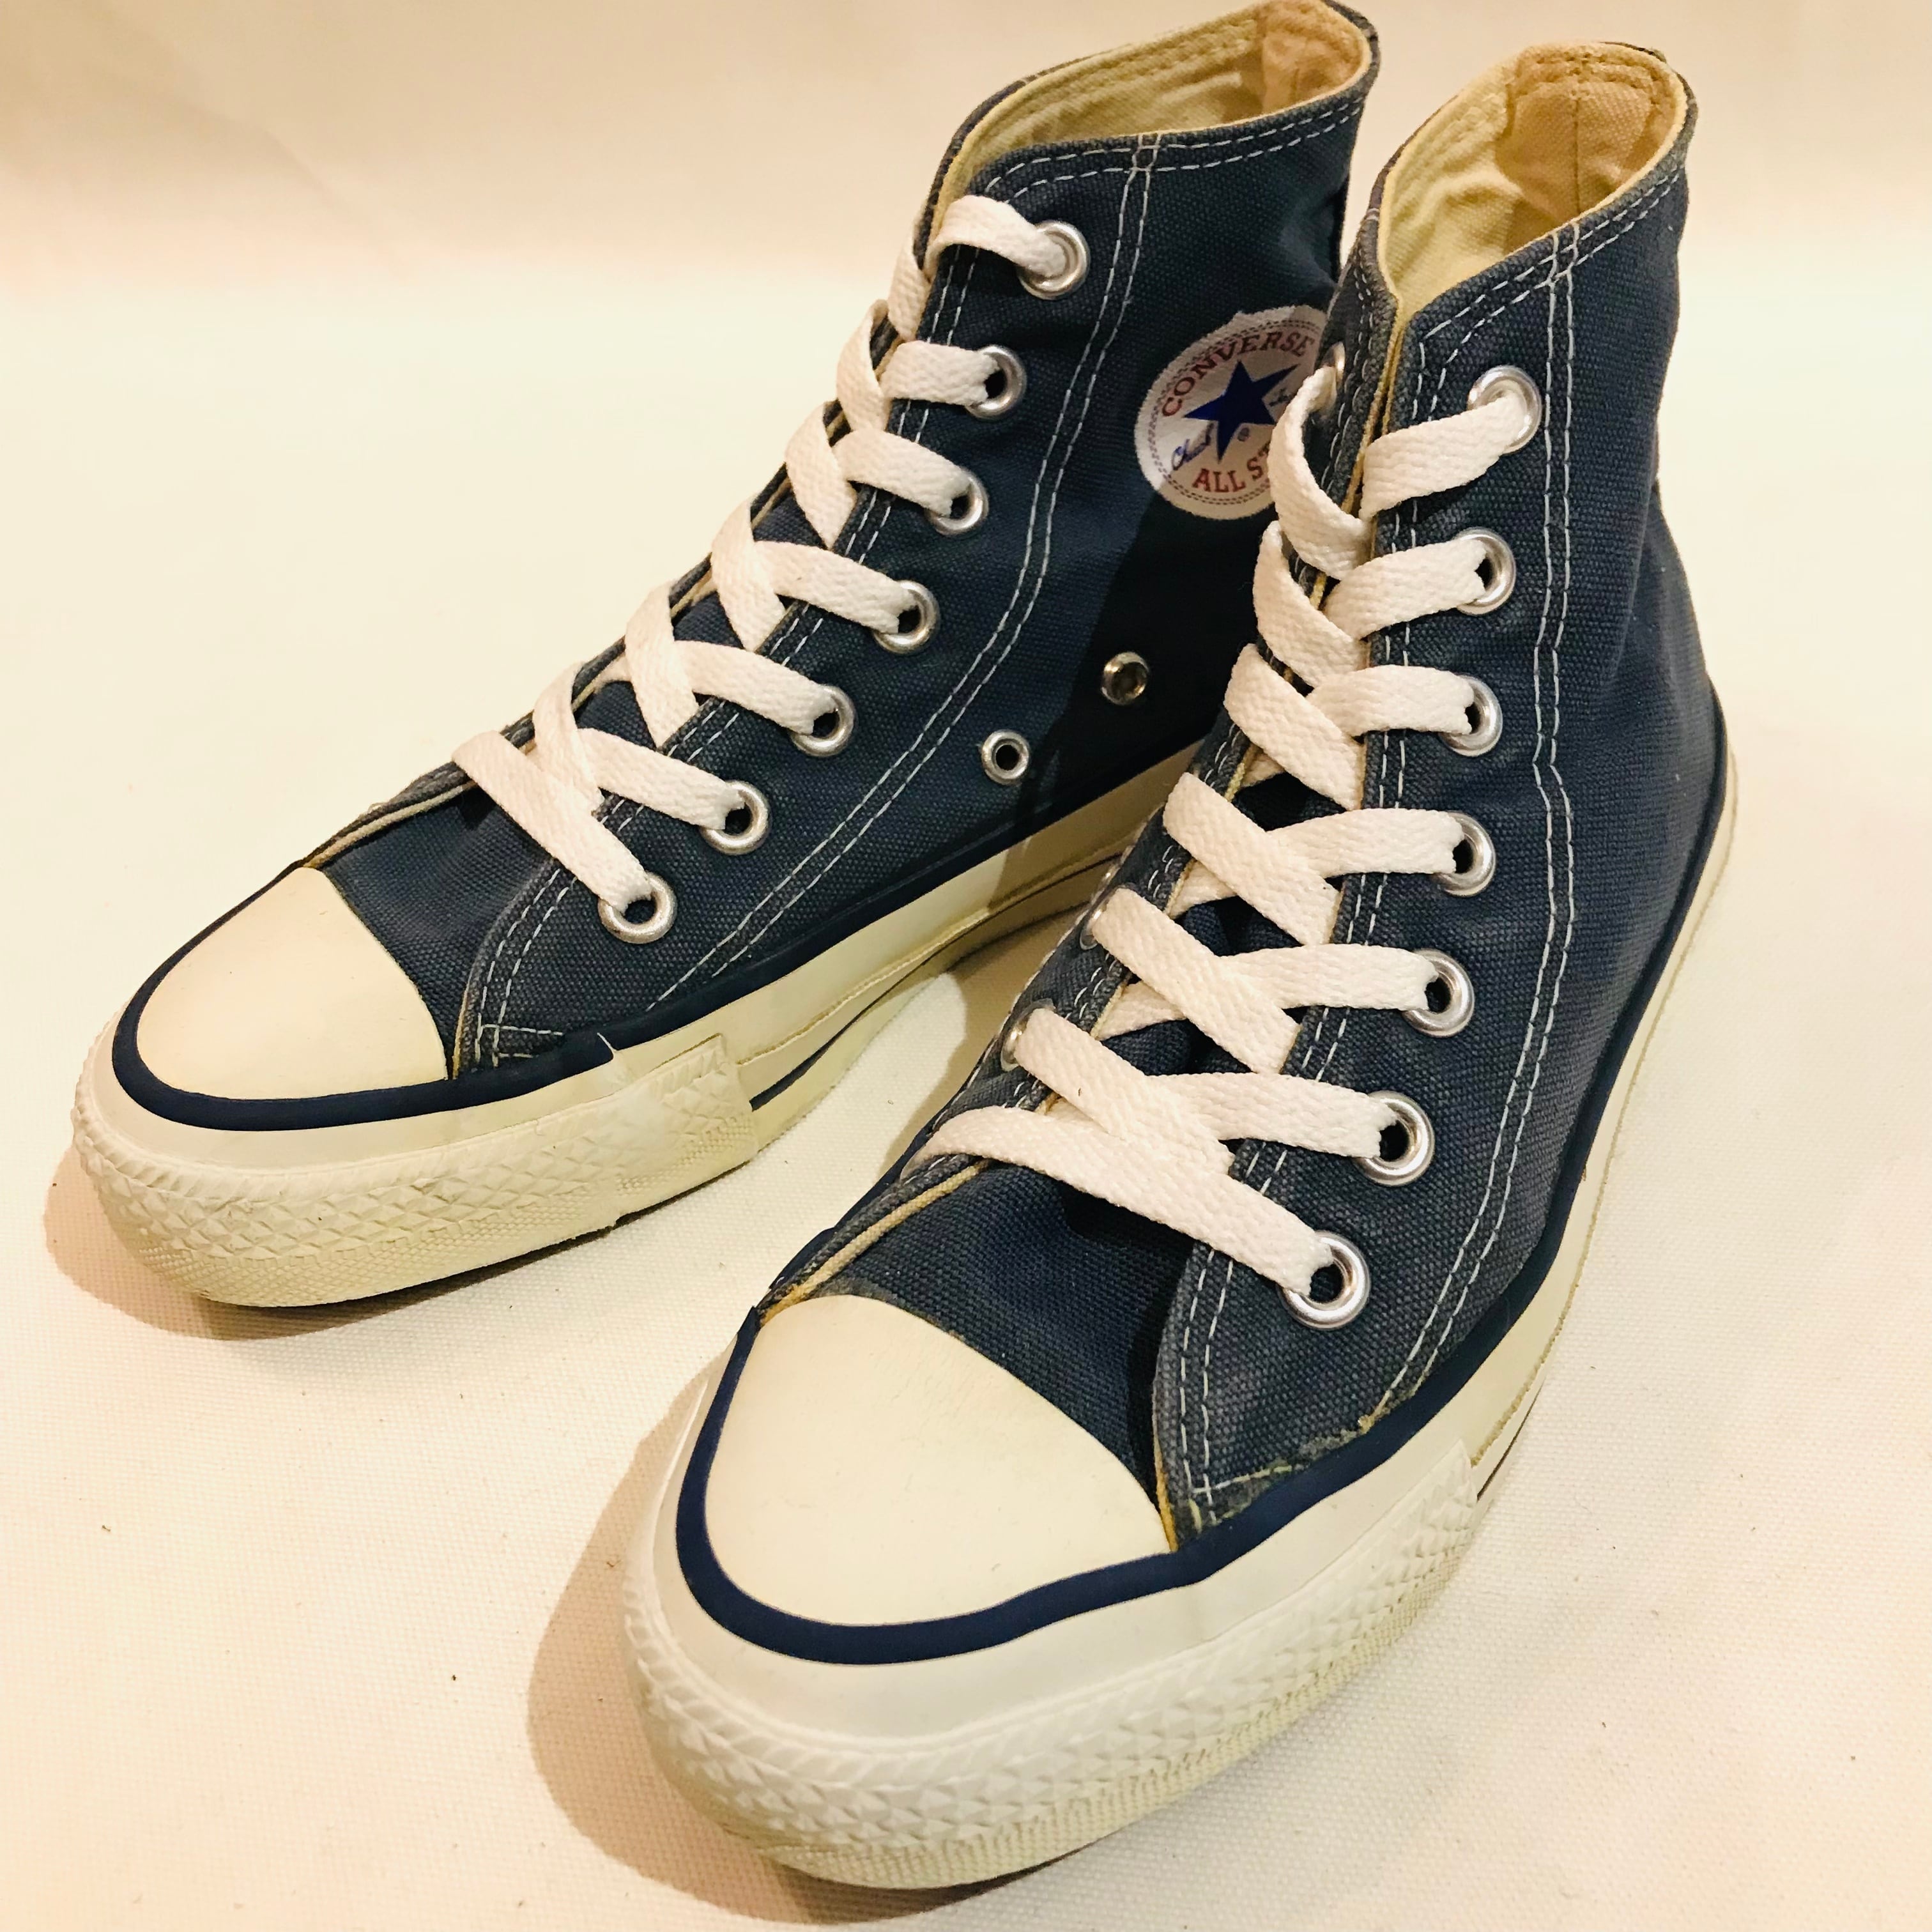 Converse大人気！ヴィンテージ！CONVERSE made in USA！